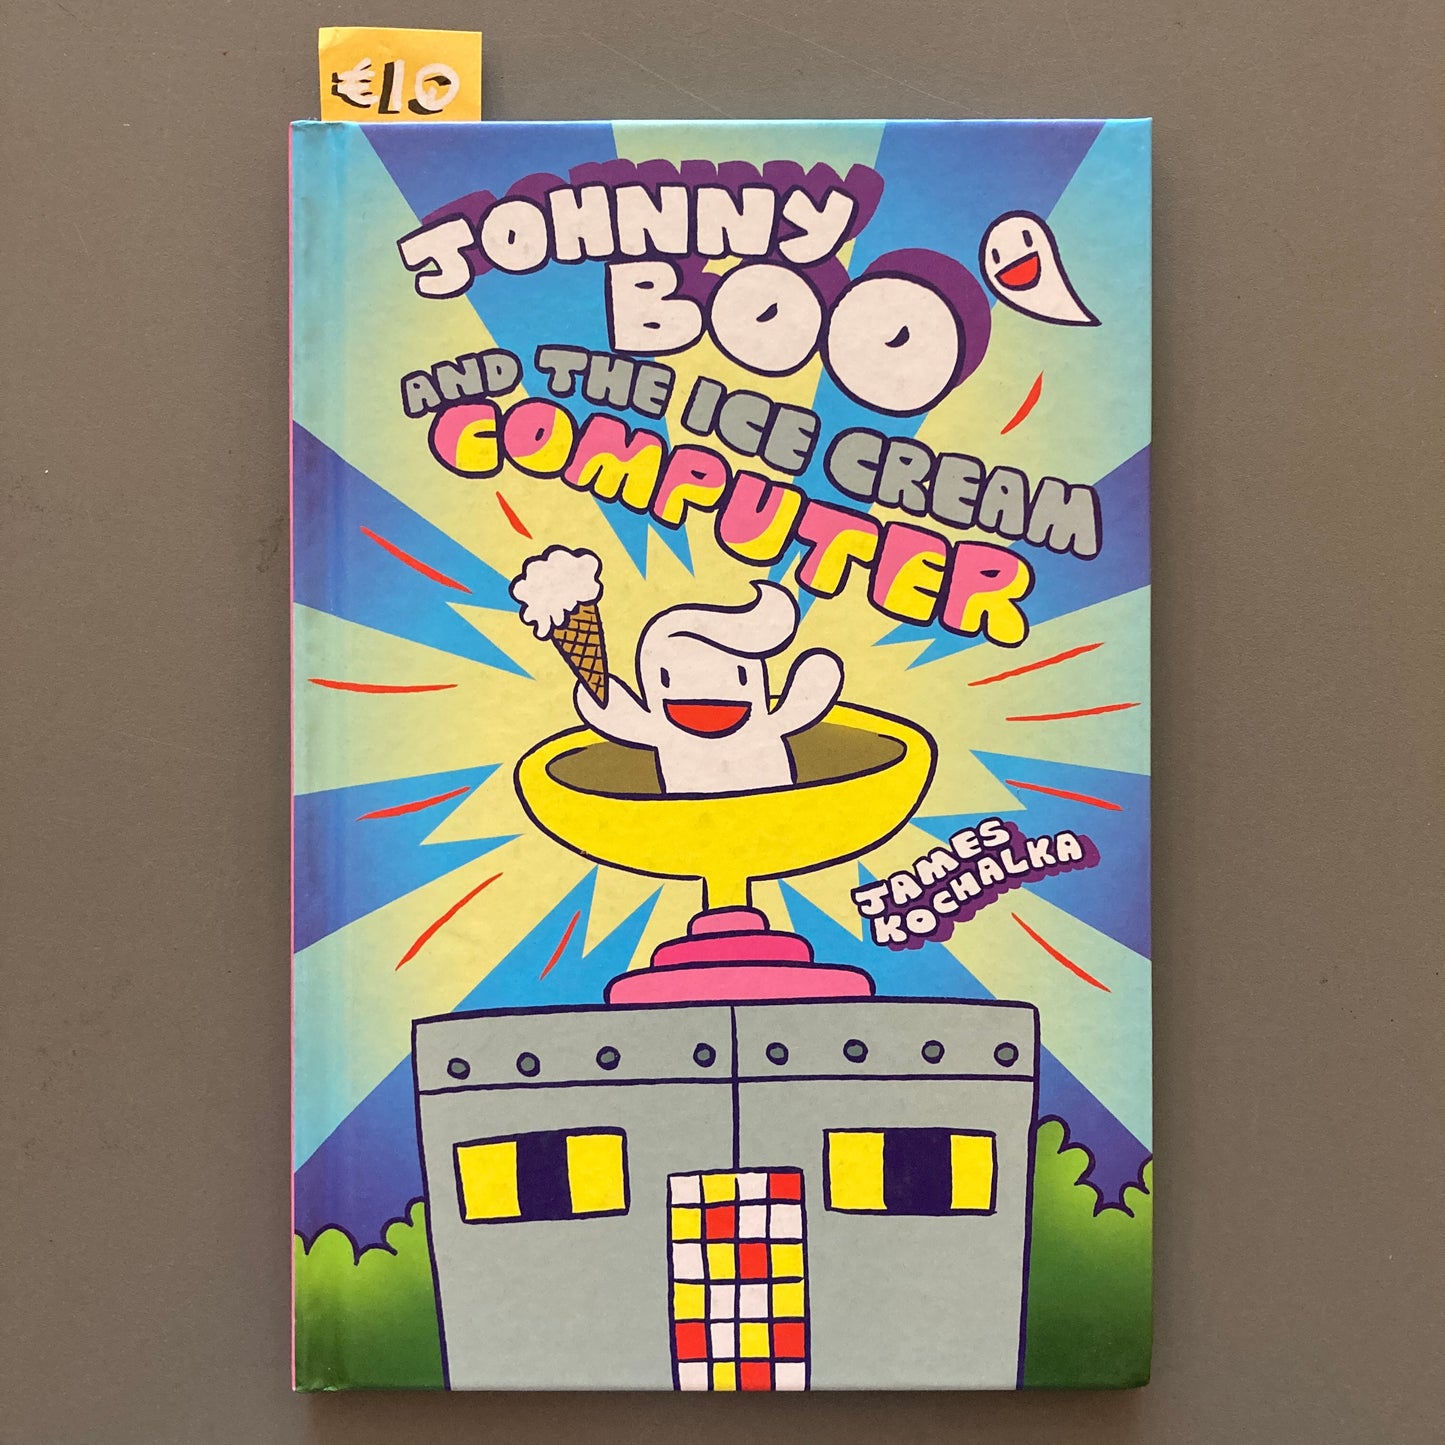 Johnny Boo and the Ice Cream Computer